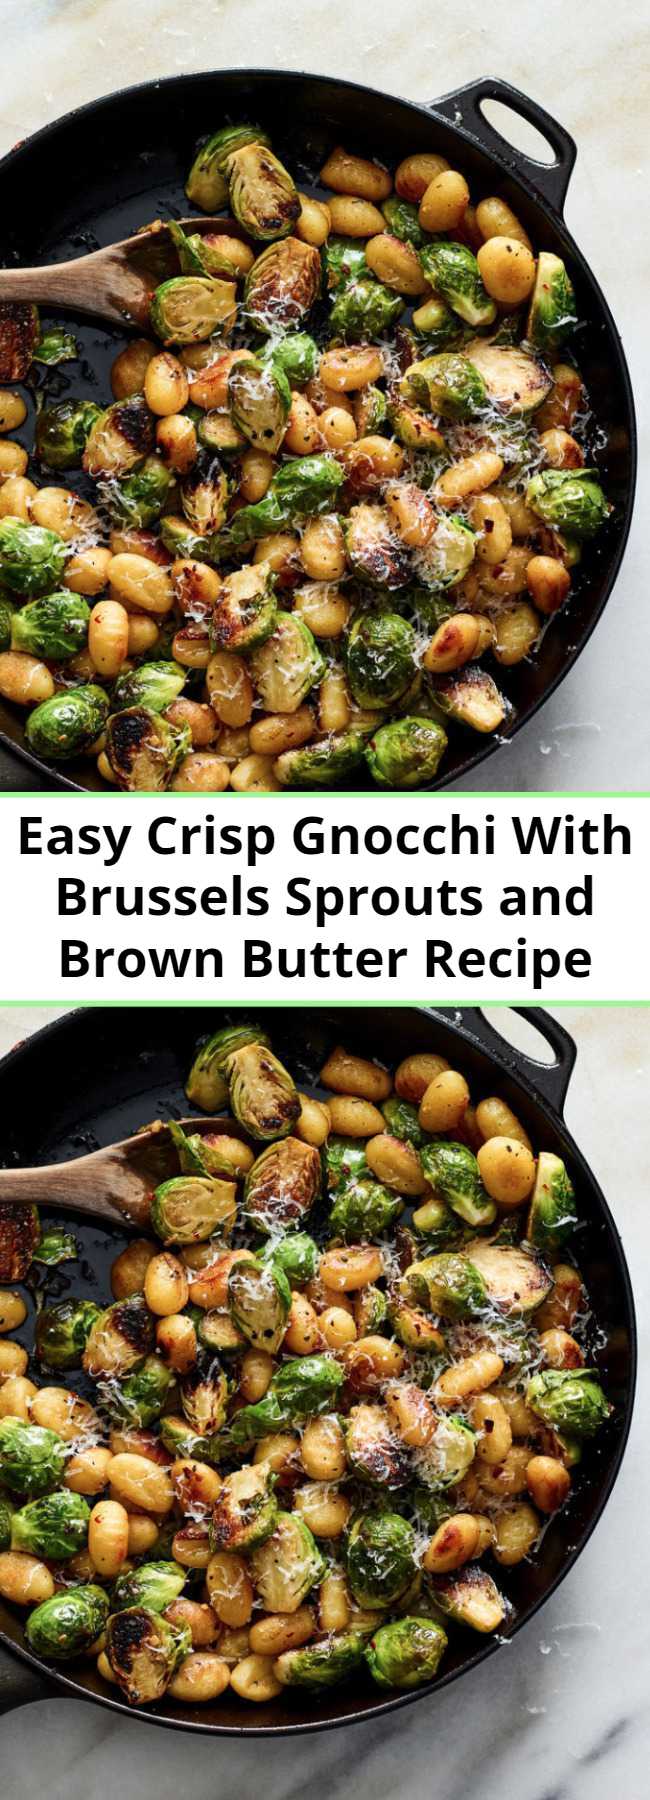 Easy Crisp Gnocchi With Brussels Sprouts and Brown Butter Recipe - For a fantastic meal that can be ready in 20 minutes, toss together seared gnocchi and sautéed brussels sprouts with lemon zest, red-pepper flakes and brown butter. The key to this recipe is how you cook the store-bought gnocchi: No need to boil. Just sear them until they are crisp and golden on the outside, and their insides will stay chewy. The resulting texture is reminiscent of fried dough.